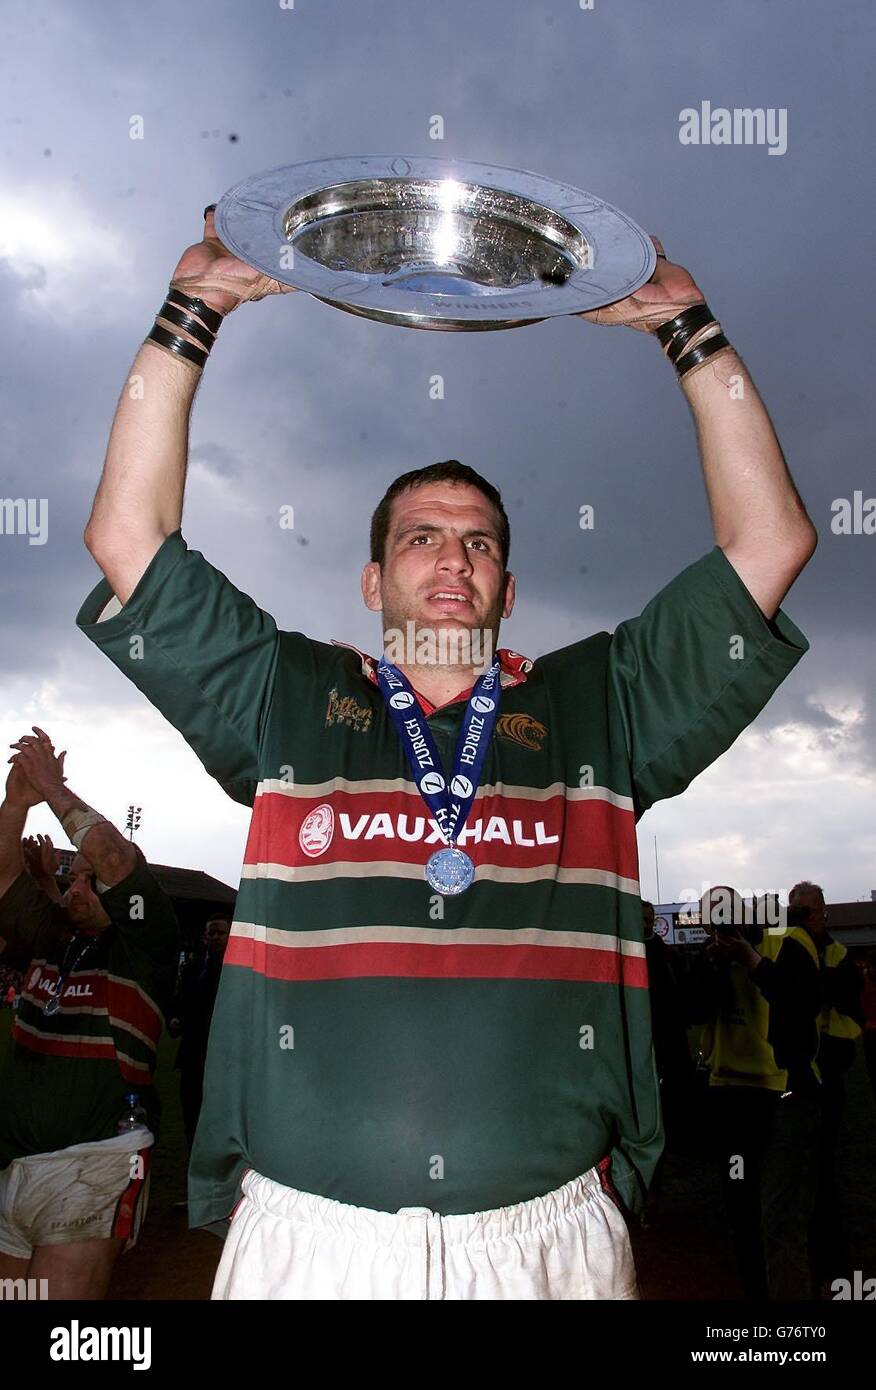 Leicester Tigers' captain Martin Johnson holds the Zurich Premiership Trophy aloft after clinching the title after todays 20-12 victory over Newcastle Falcons in the Rugby Union Zurich Premiership match at Leicester's Welford Road ground. Stock Photo